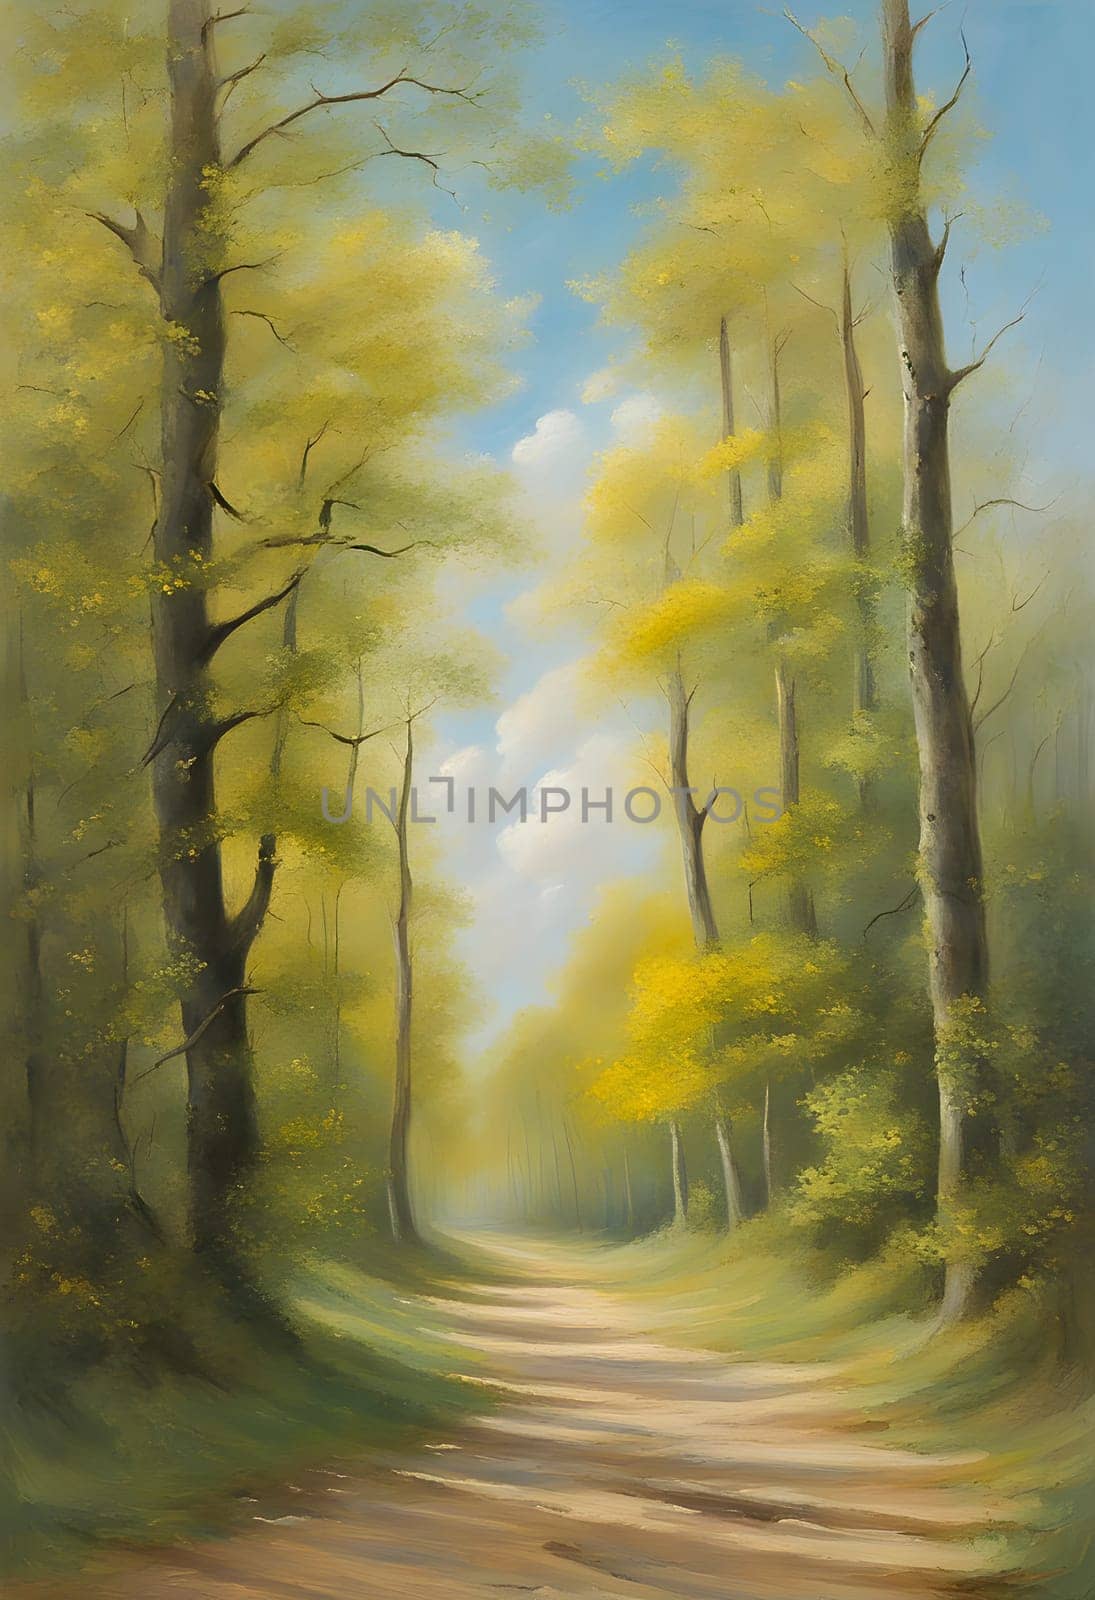 The picture shows an oil painting of a path in the forest. The road is dusty and leads through the trees. The trees are green and some of them have yellow leaves. The sky is blue with a few white clouds. Generate AI